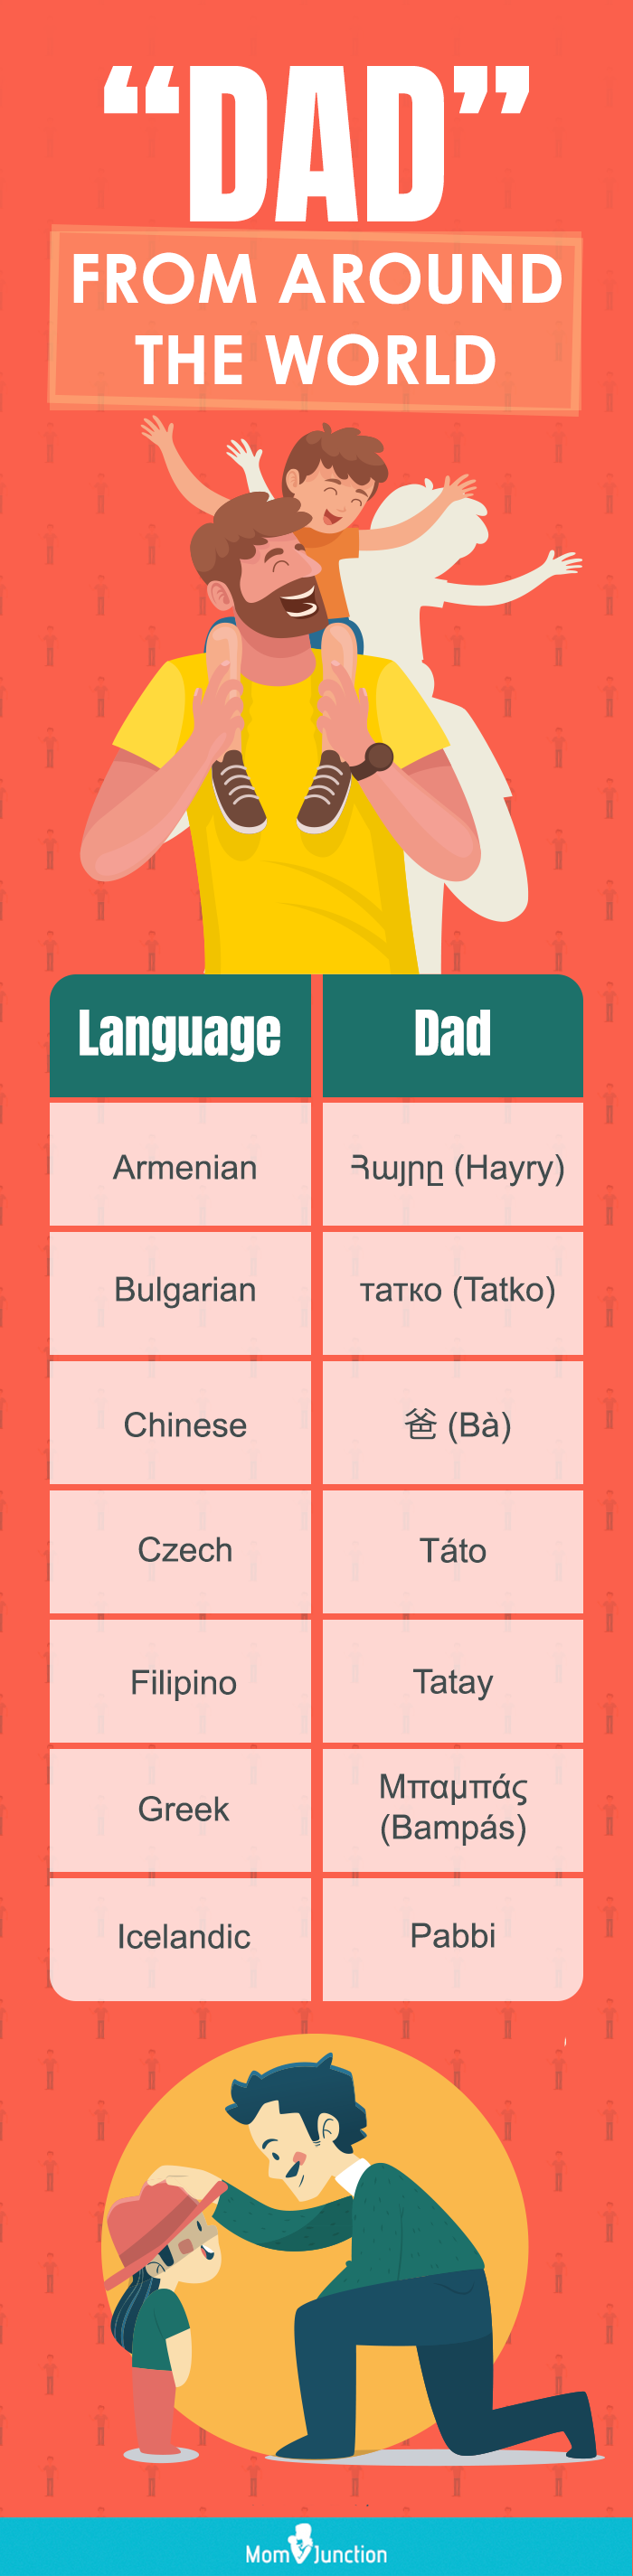 saying dad in different languages (infographic)